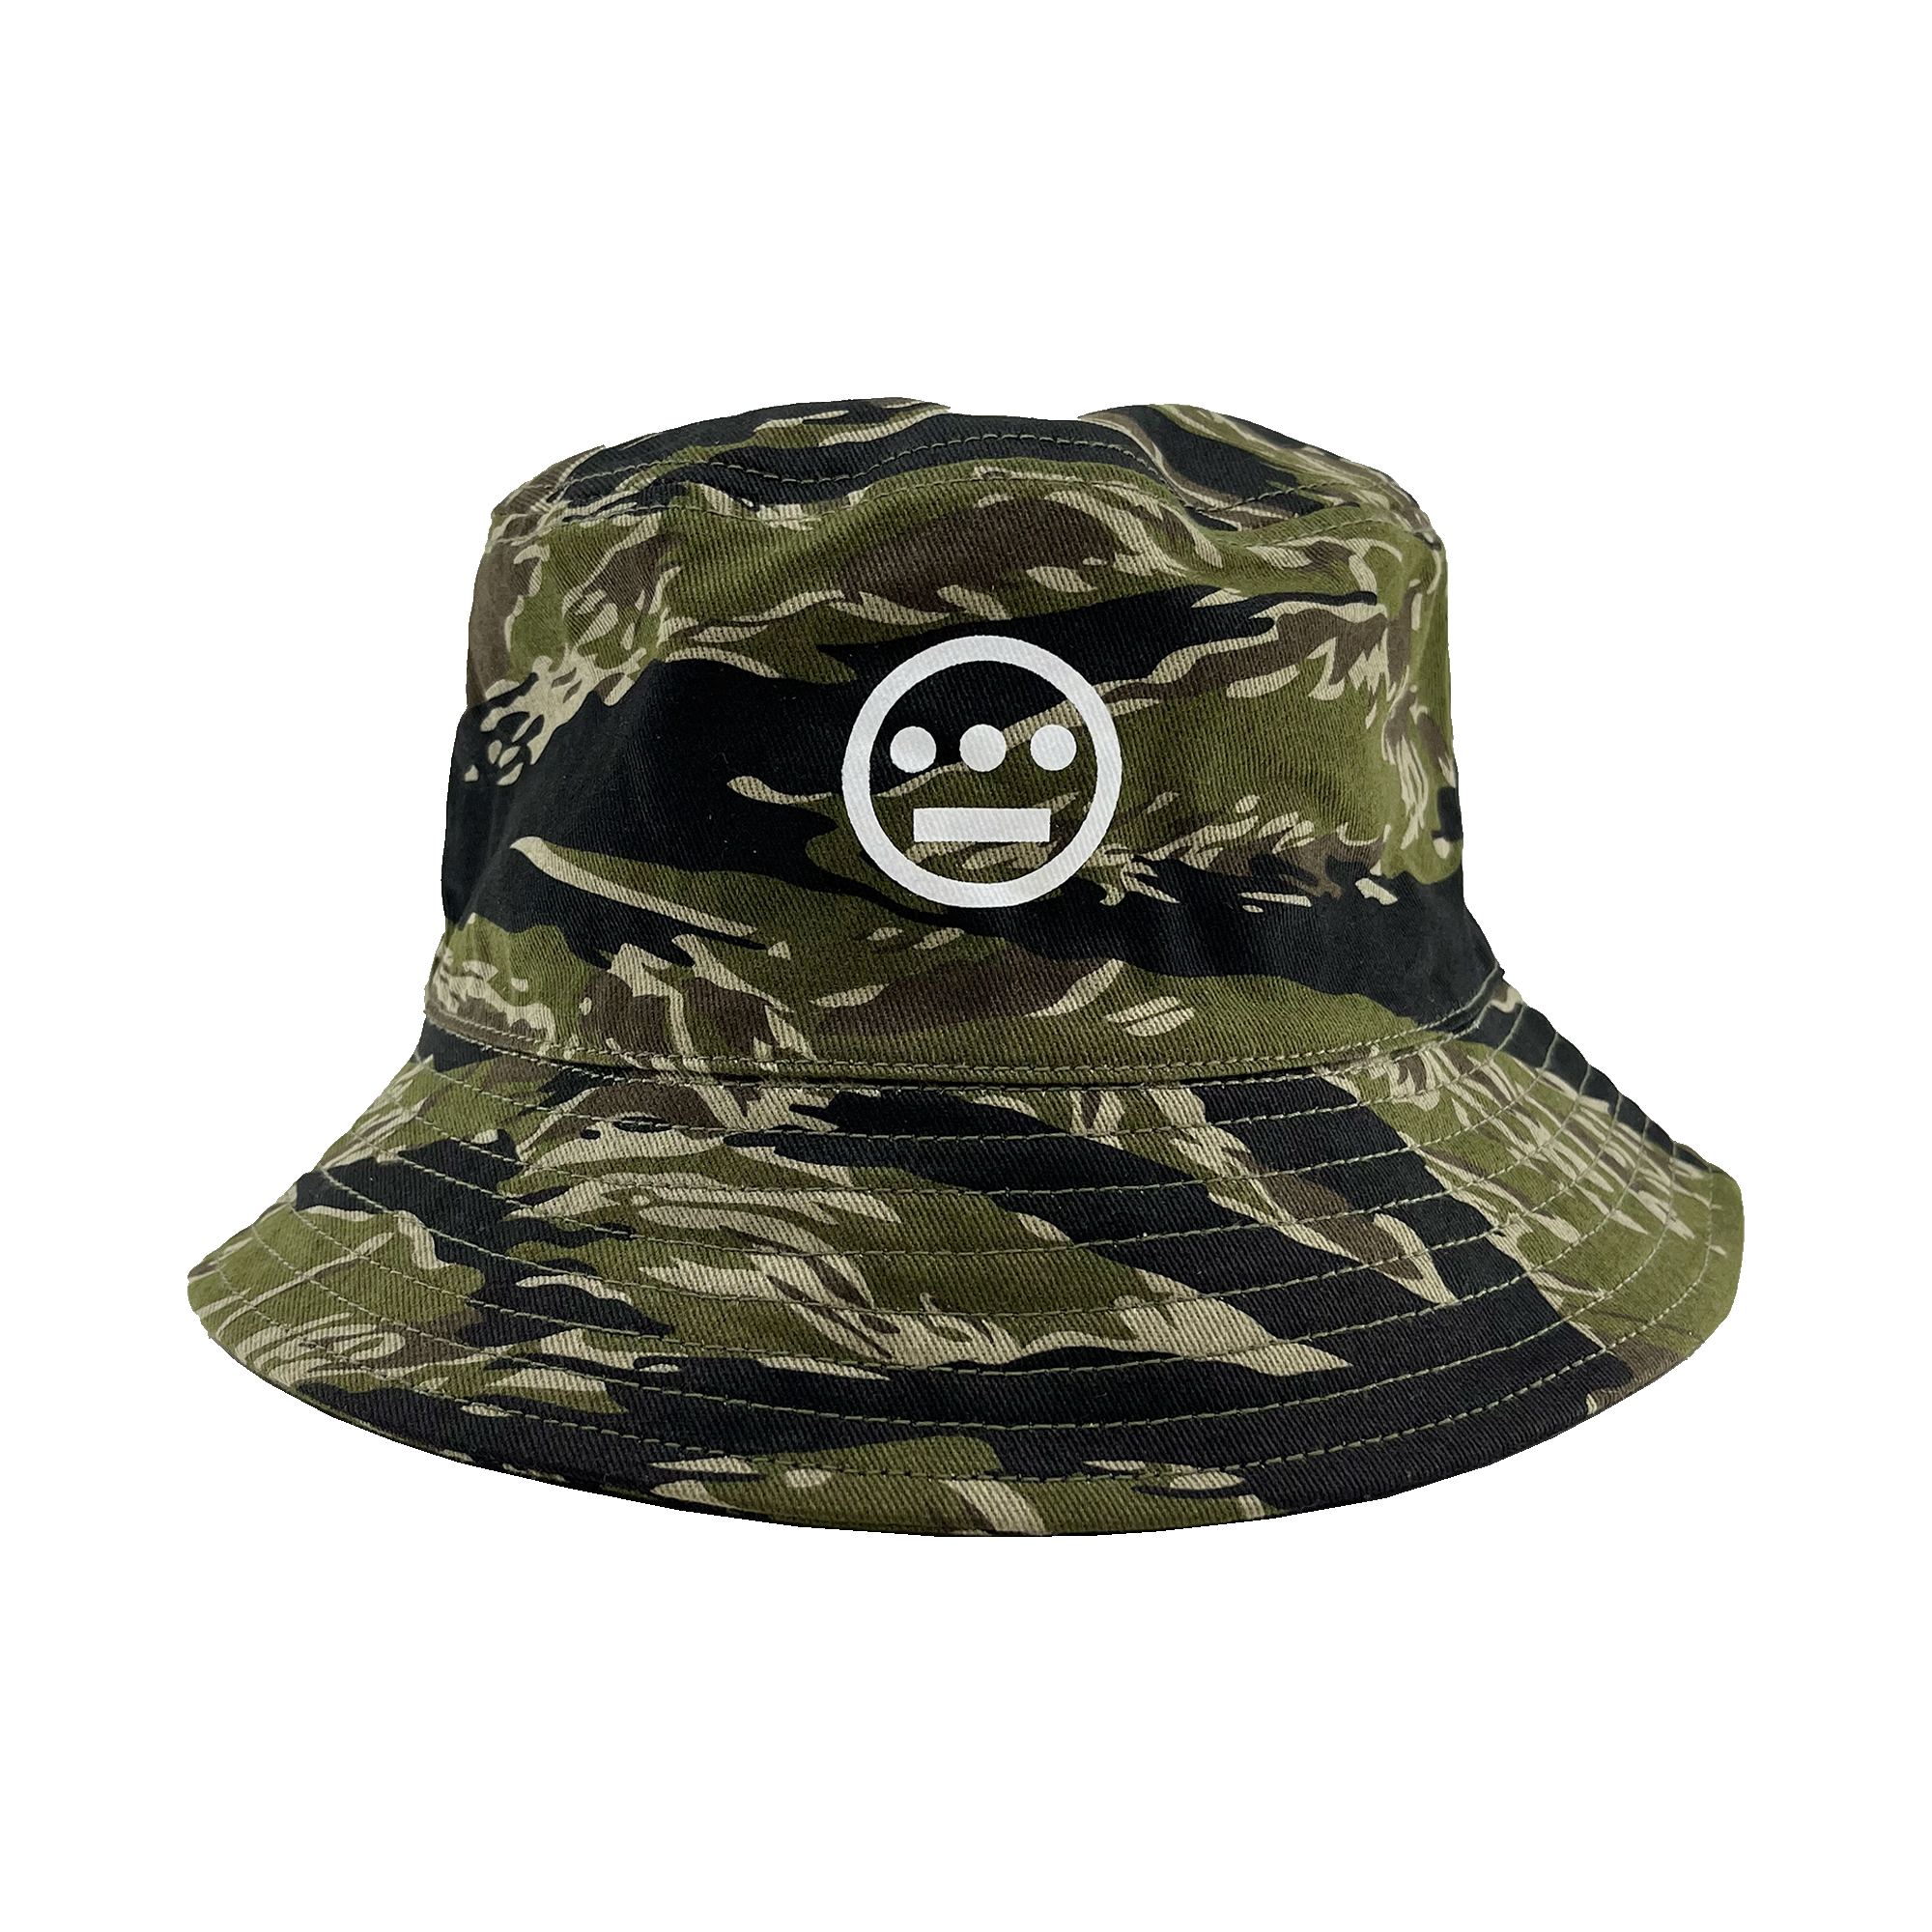 Green camouflage bucket hat with a white Hieroglyphics Hip Hop Crew logo on the front crown. 